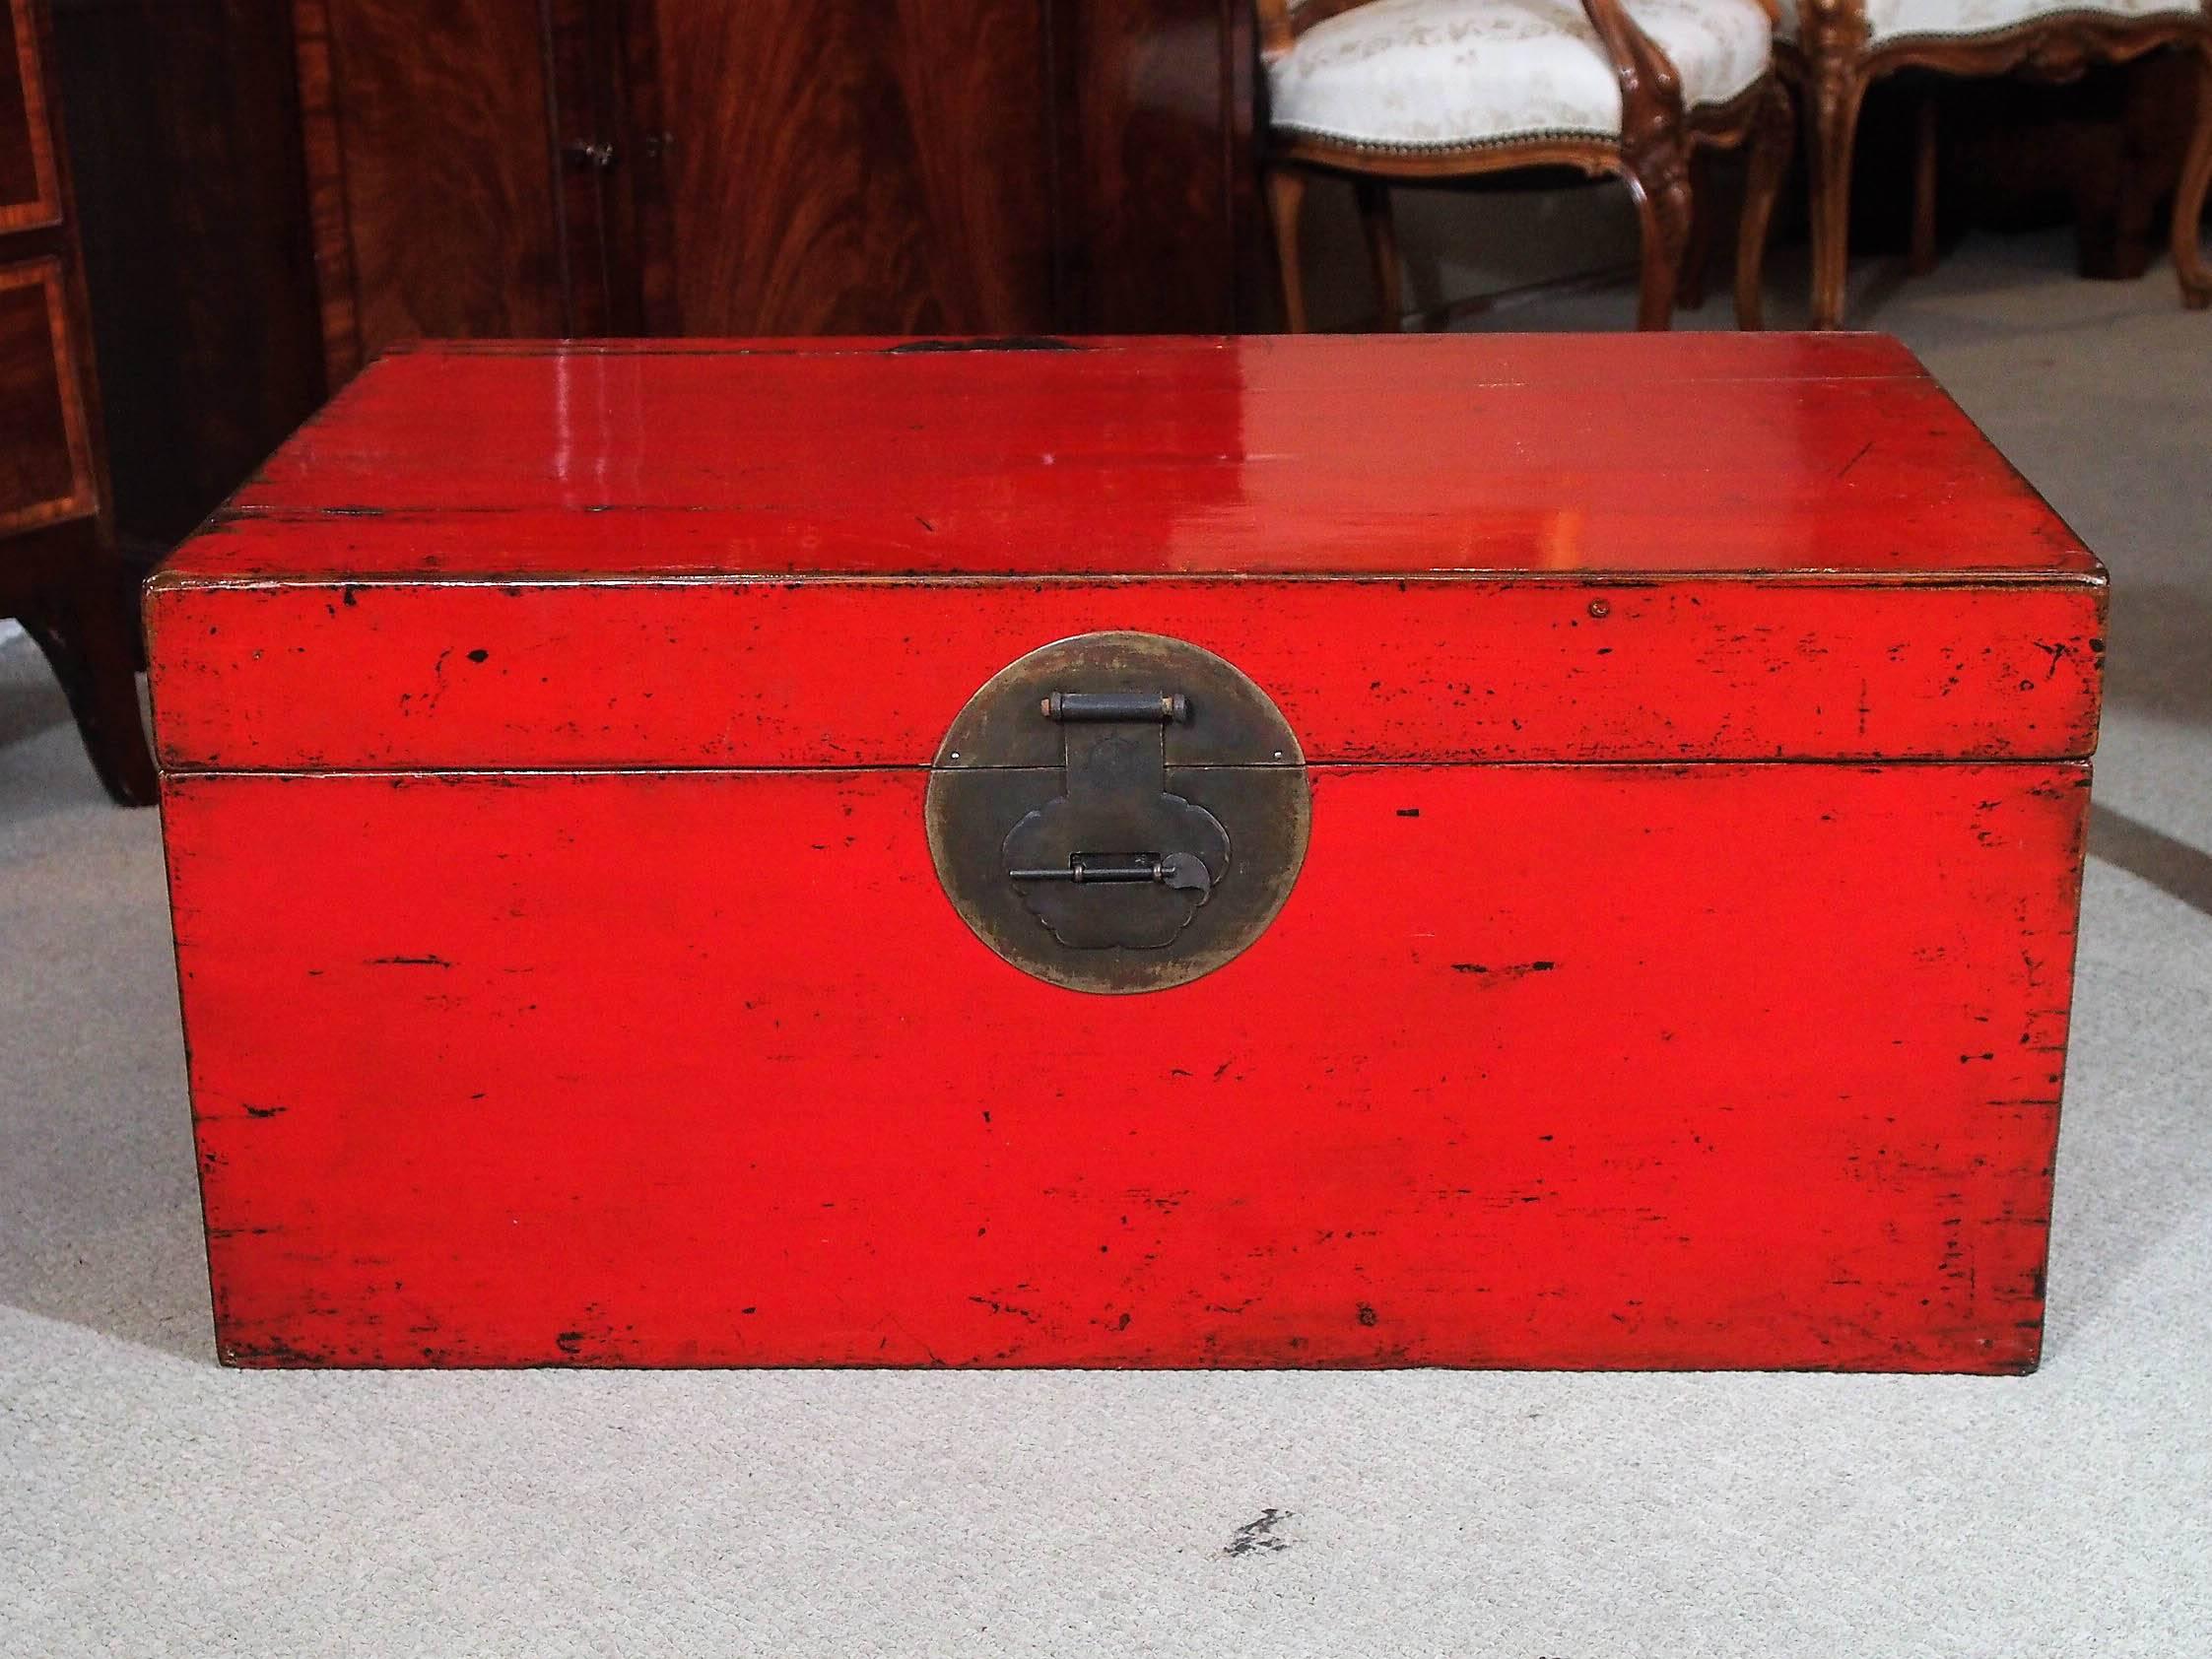 Antique Chinese lacquer trunk, circa 1910.